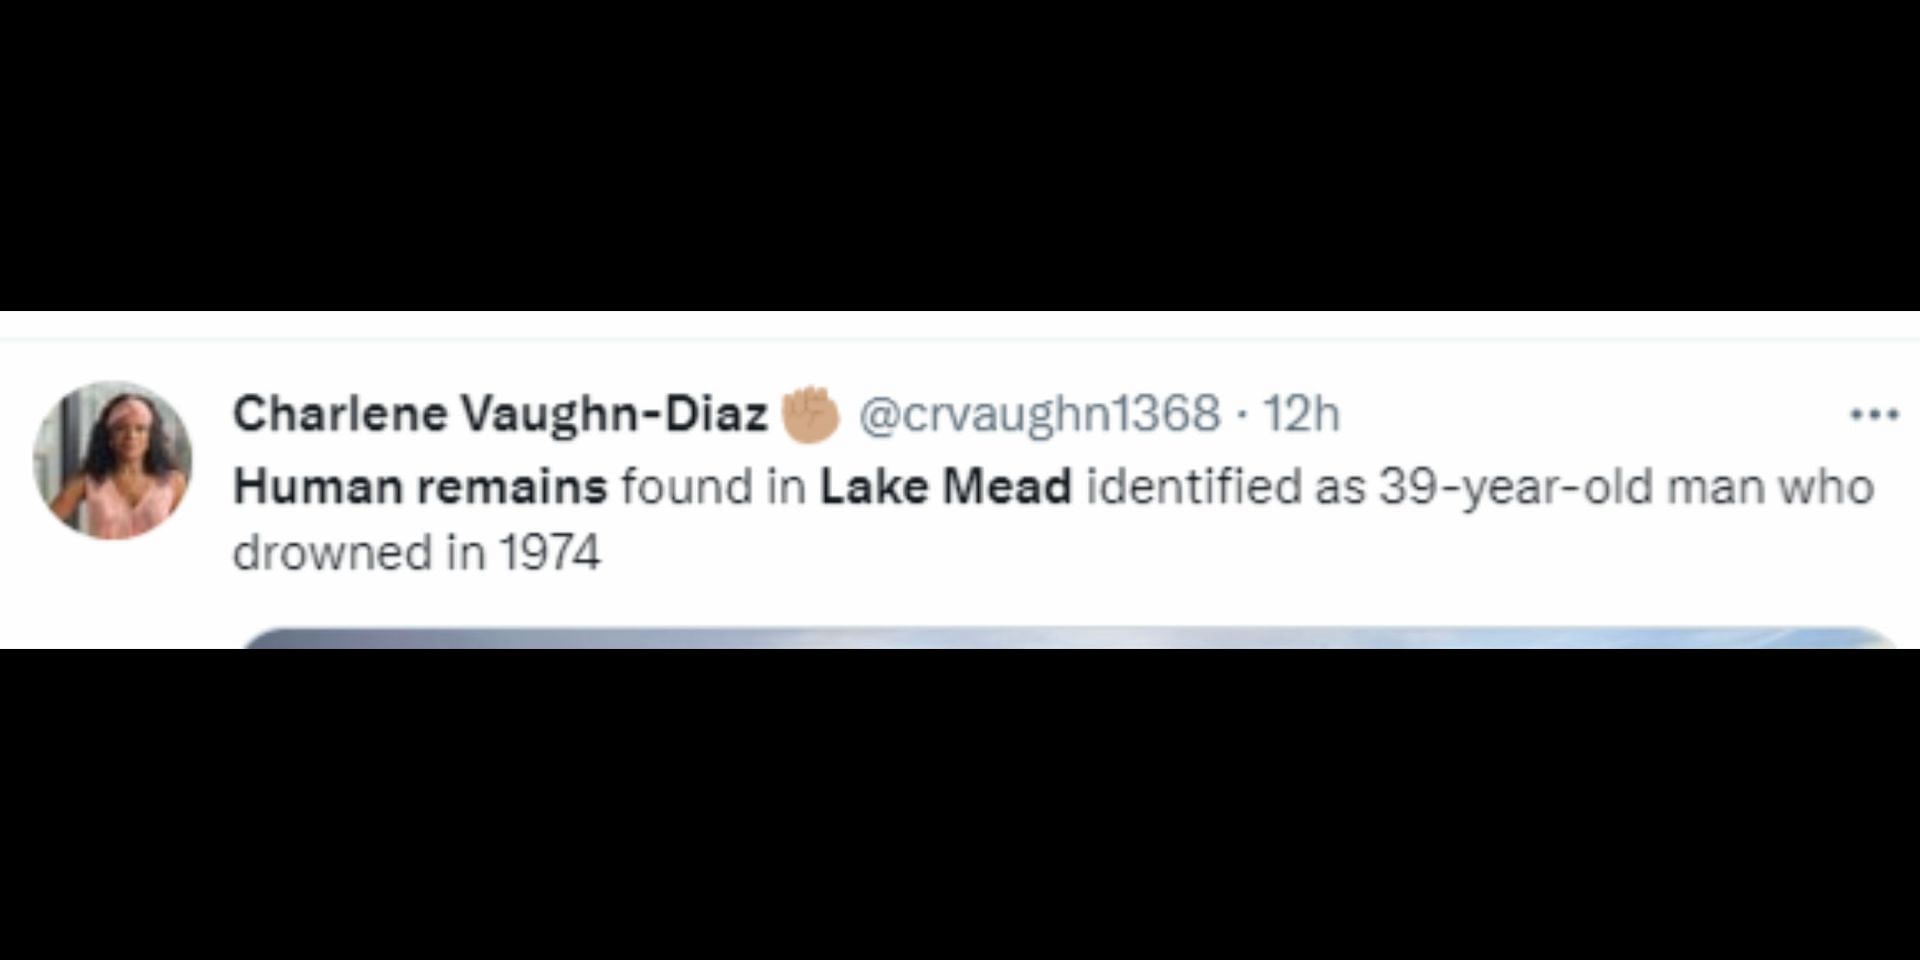 Skeletal remains found in Lake Mead was identified as a 39-year-old man from 1974 (Image via Twitter/@crvaughn1368)